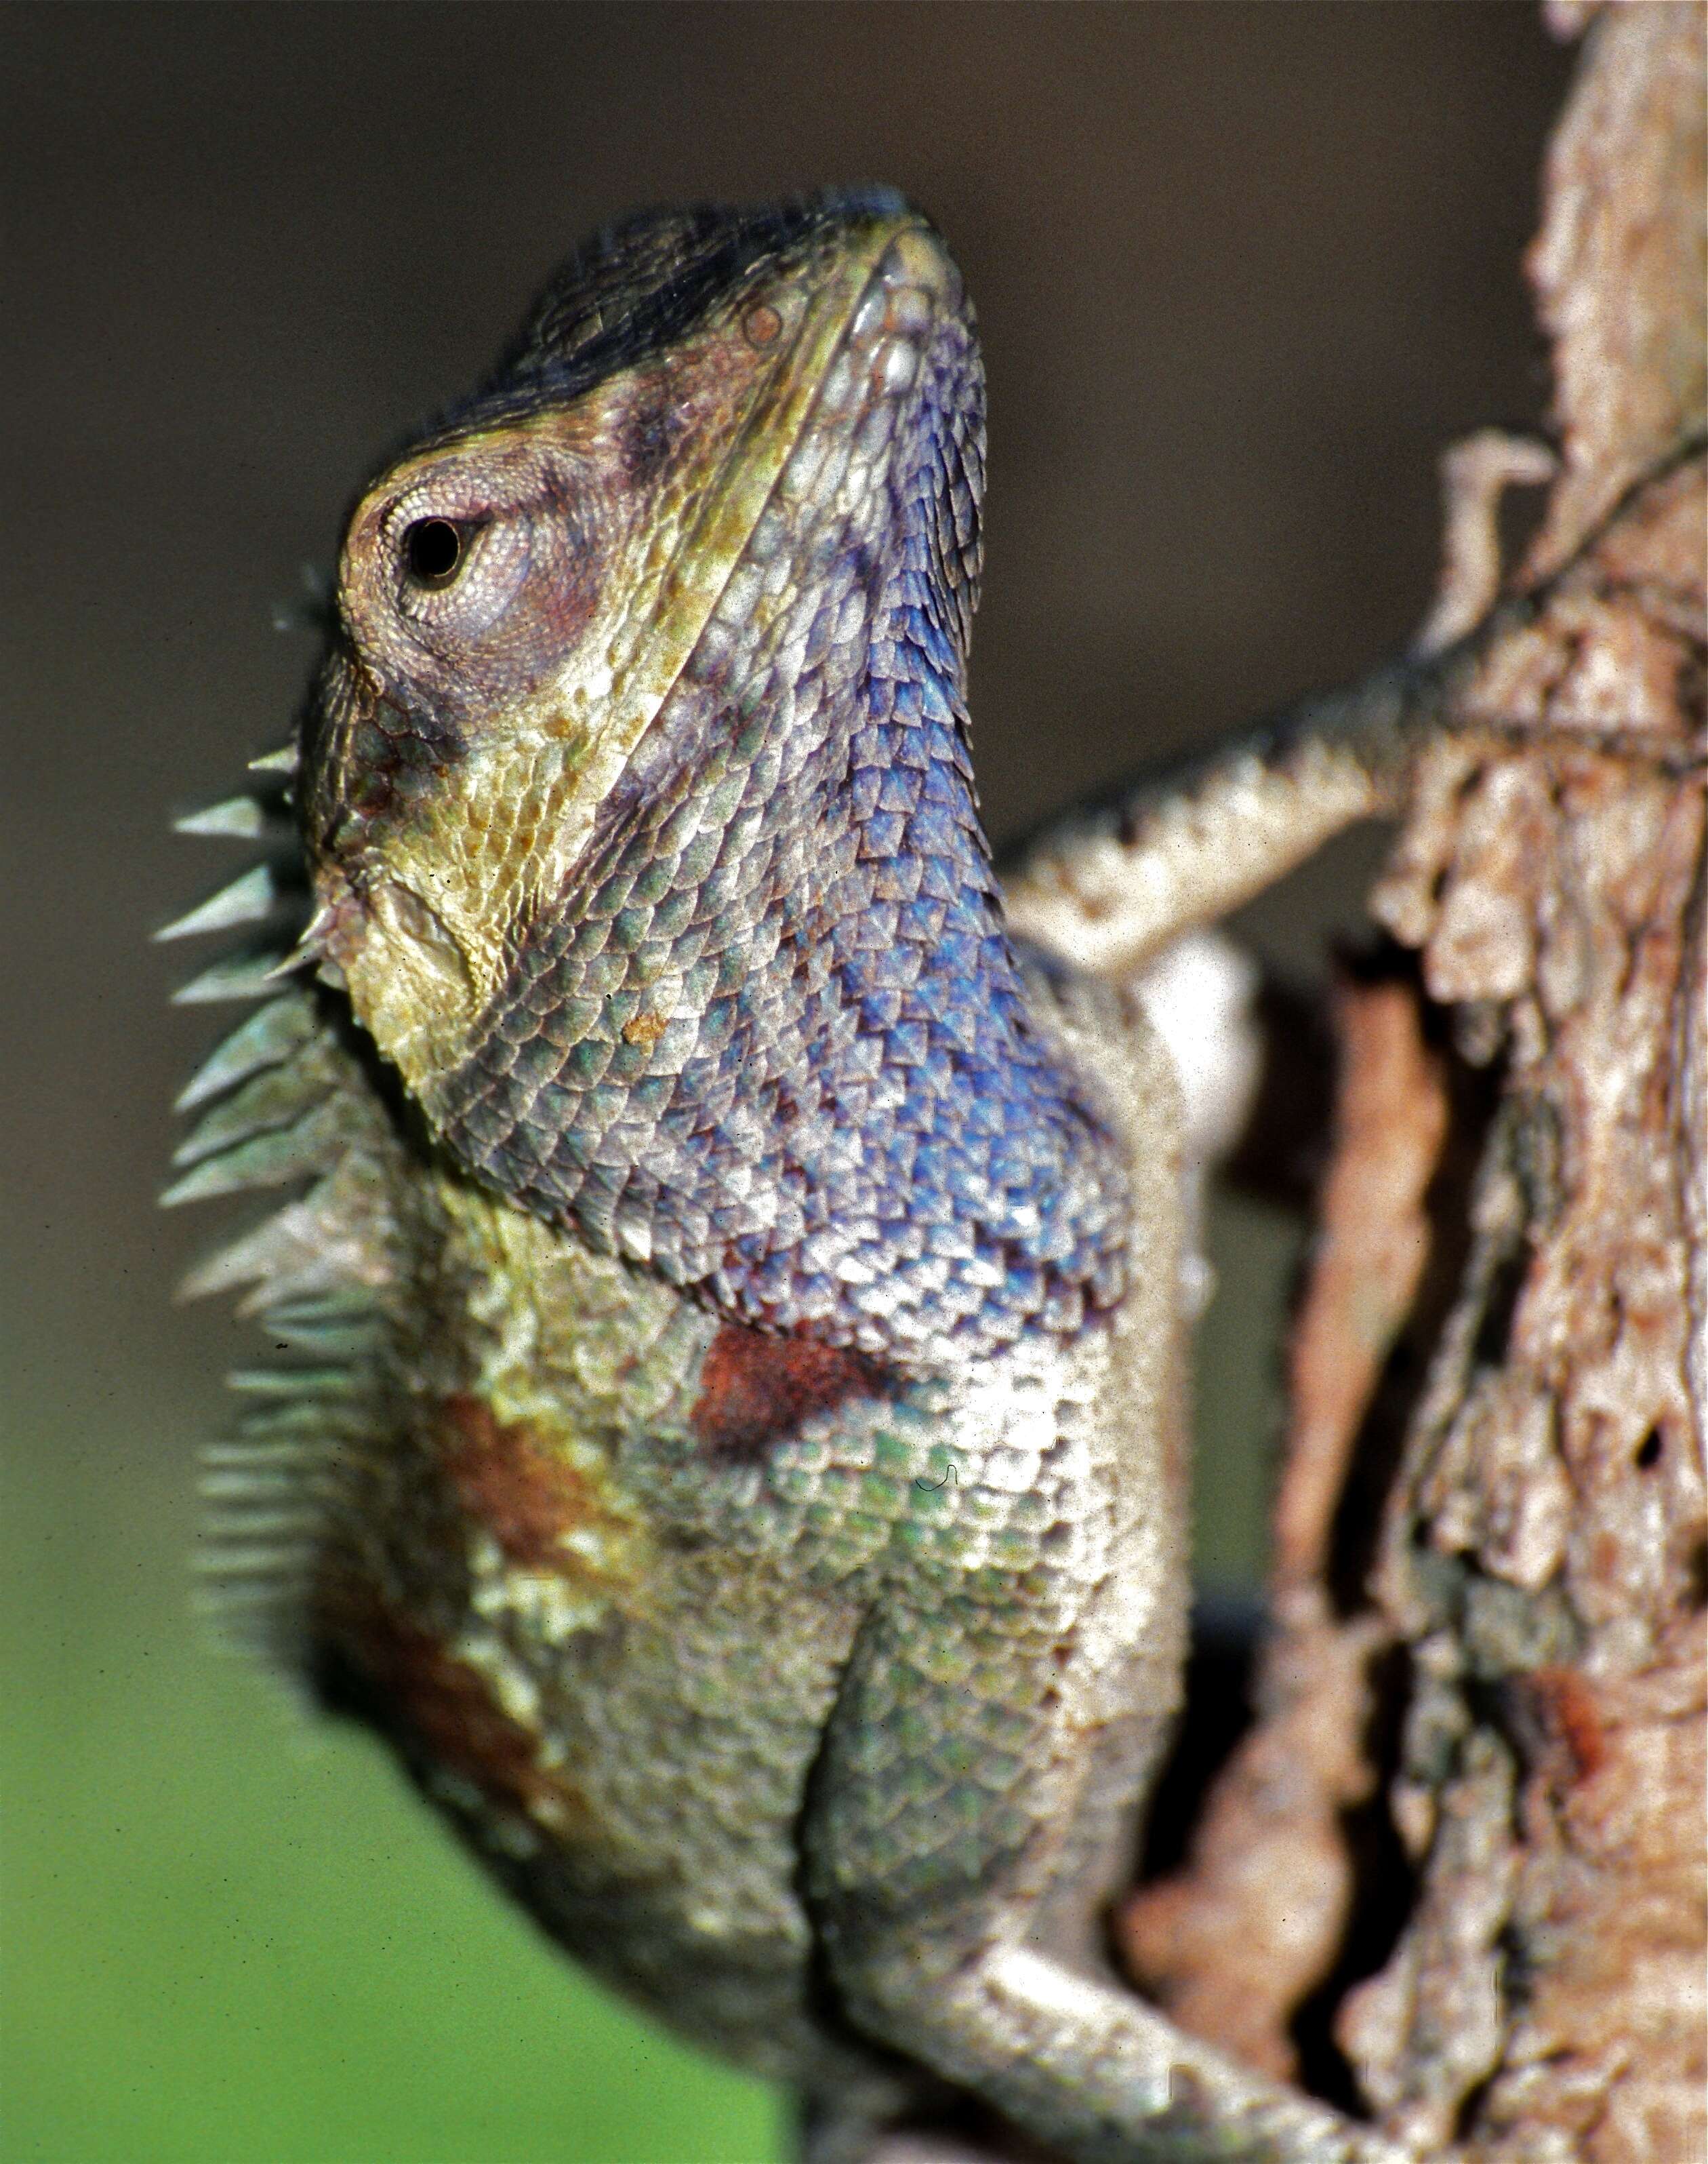 Image of Blue crested lizard